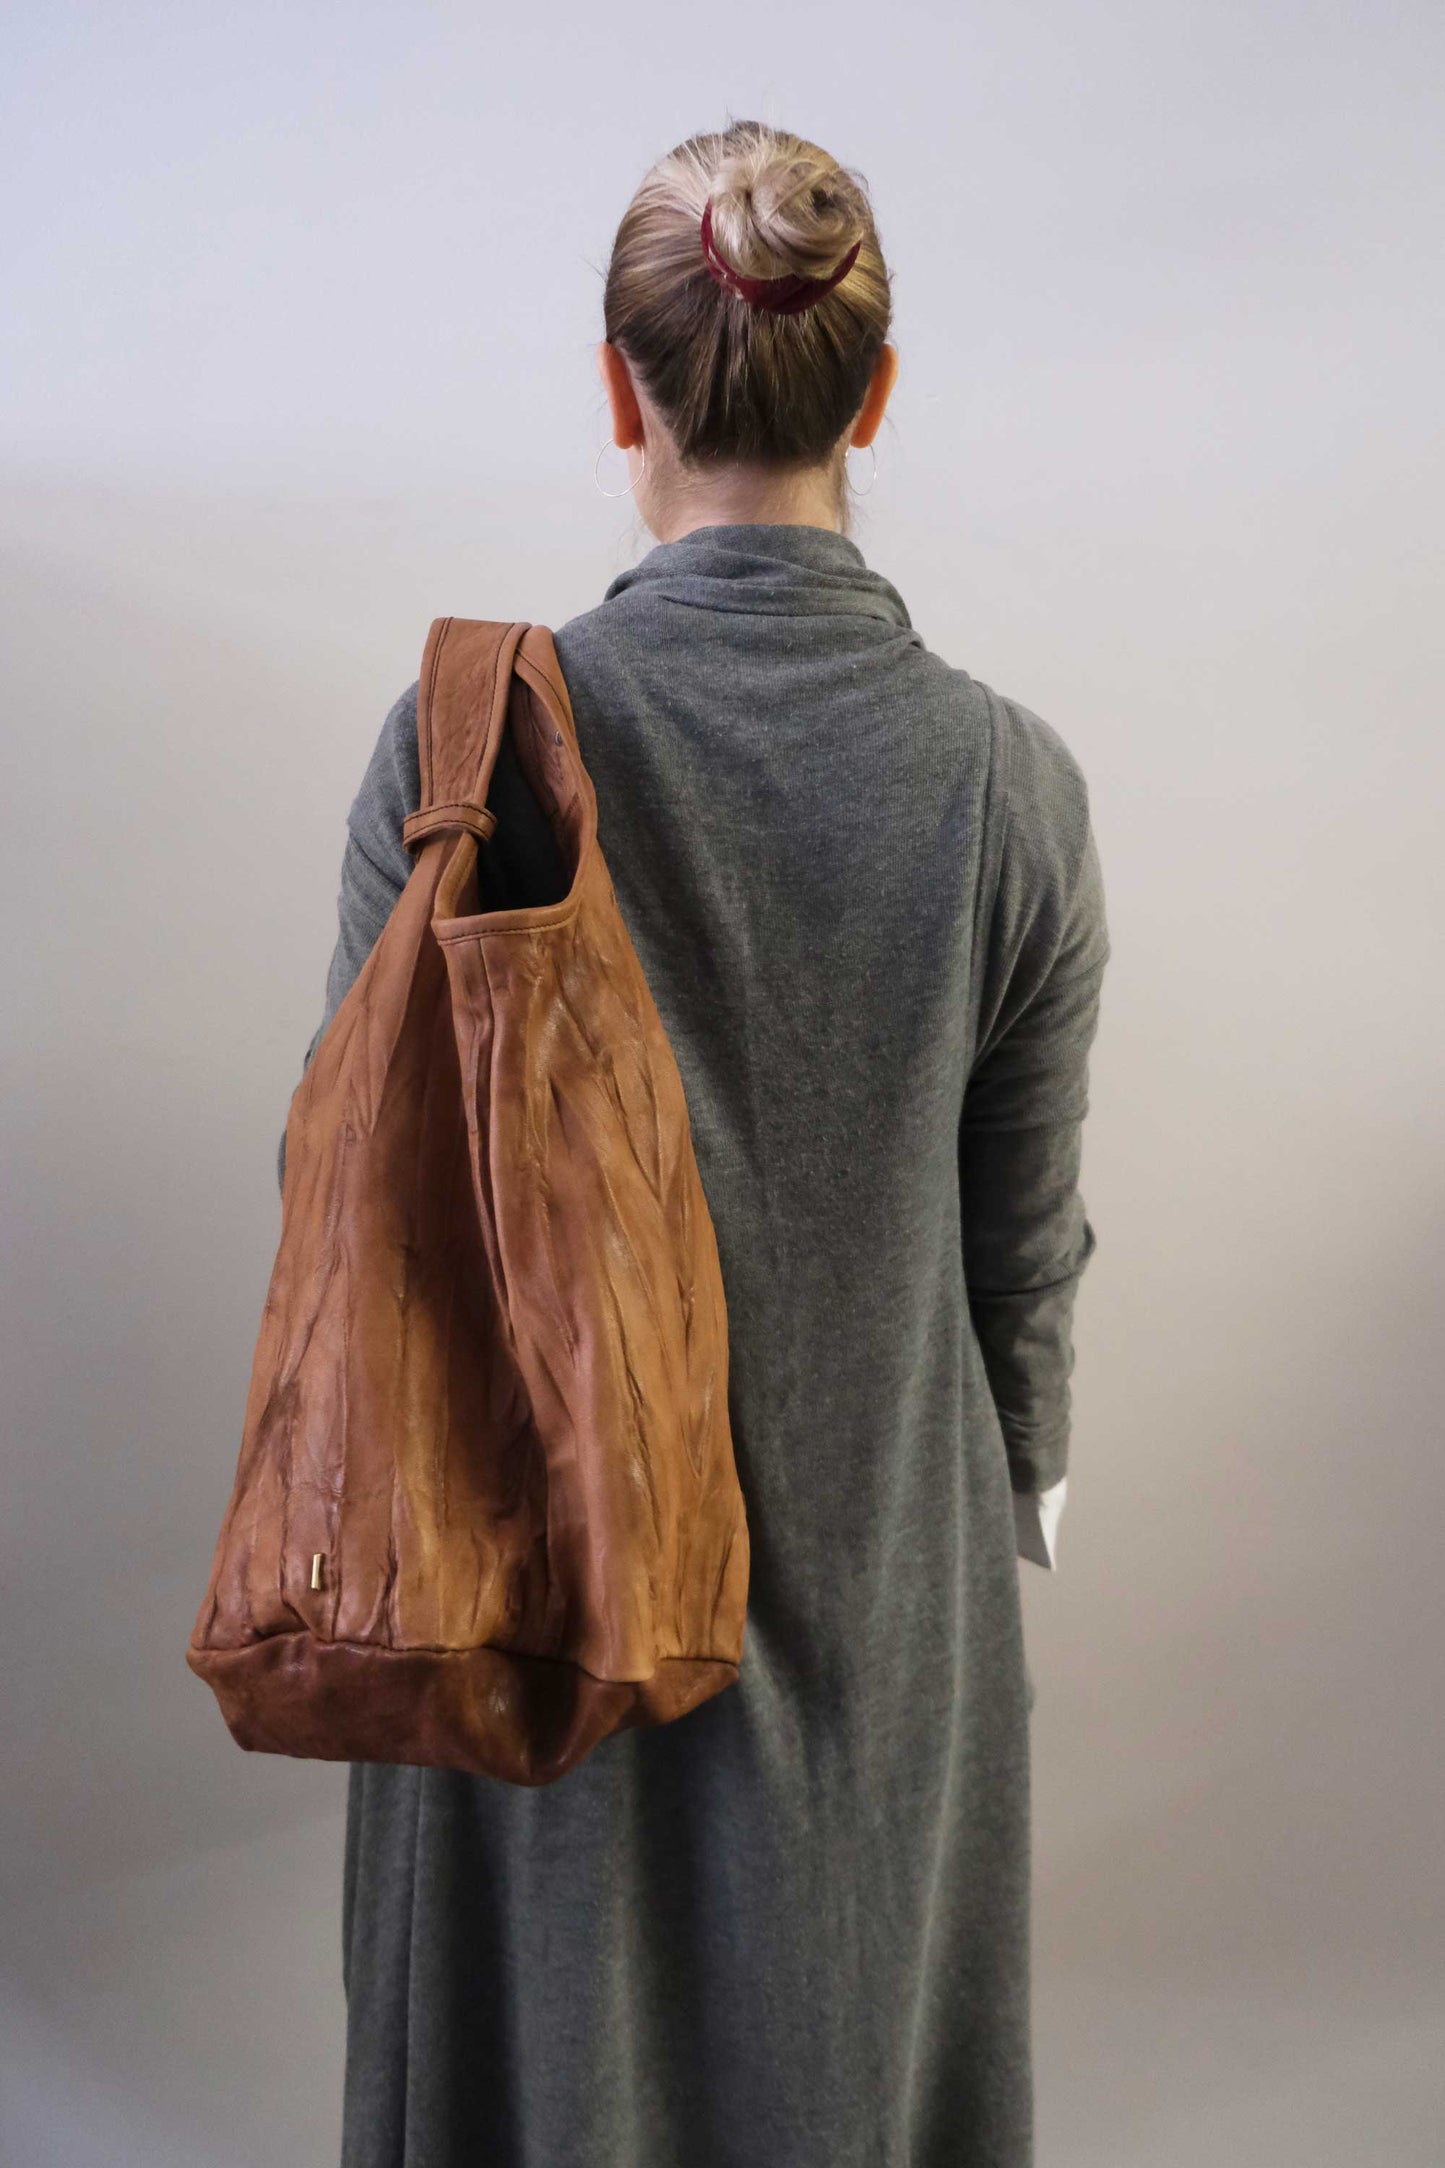 Lena tote bag in cognac soft leather